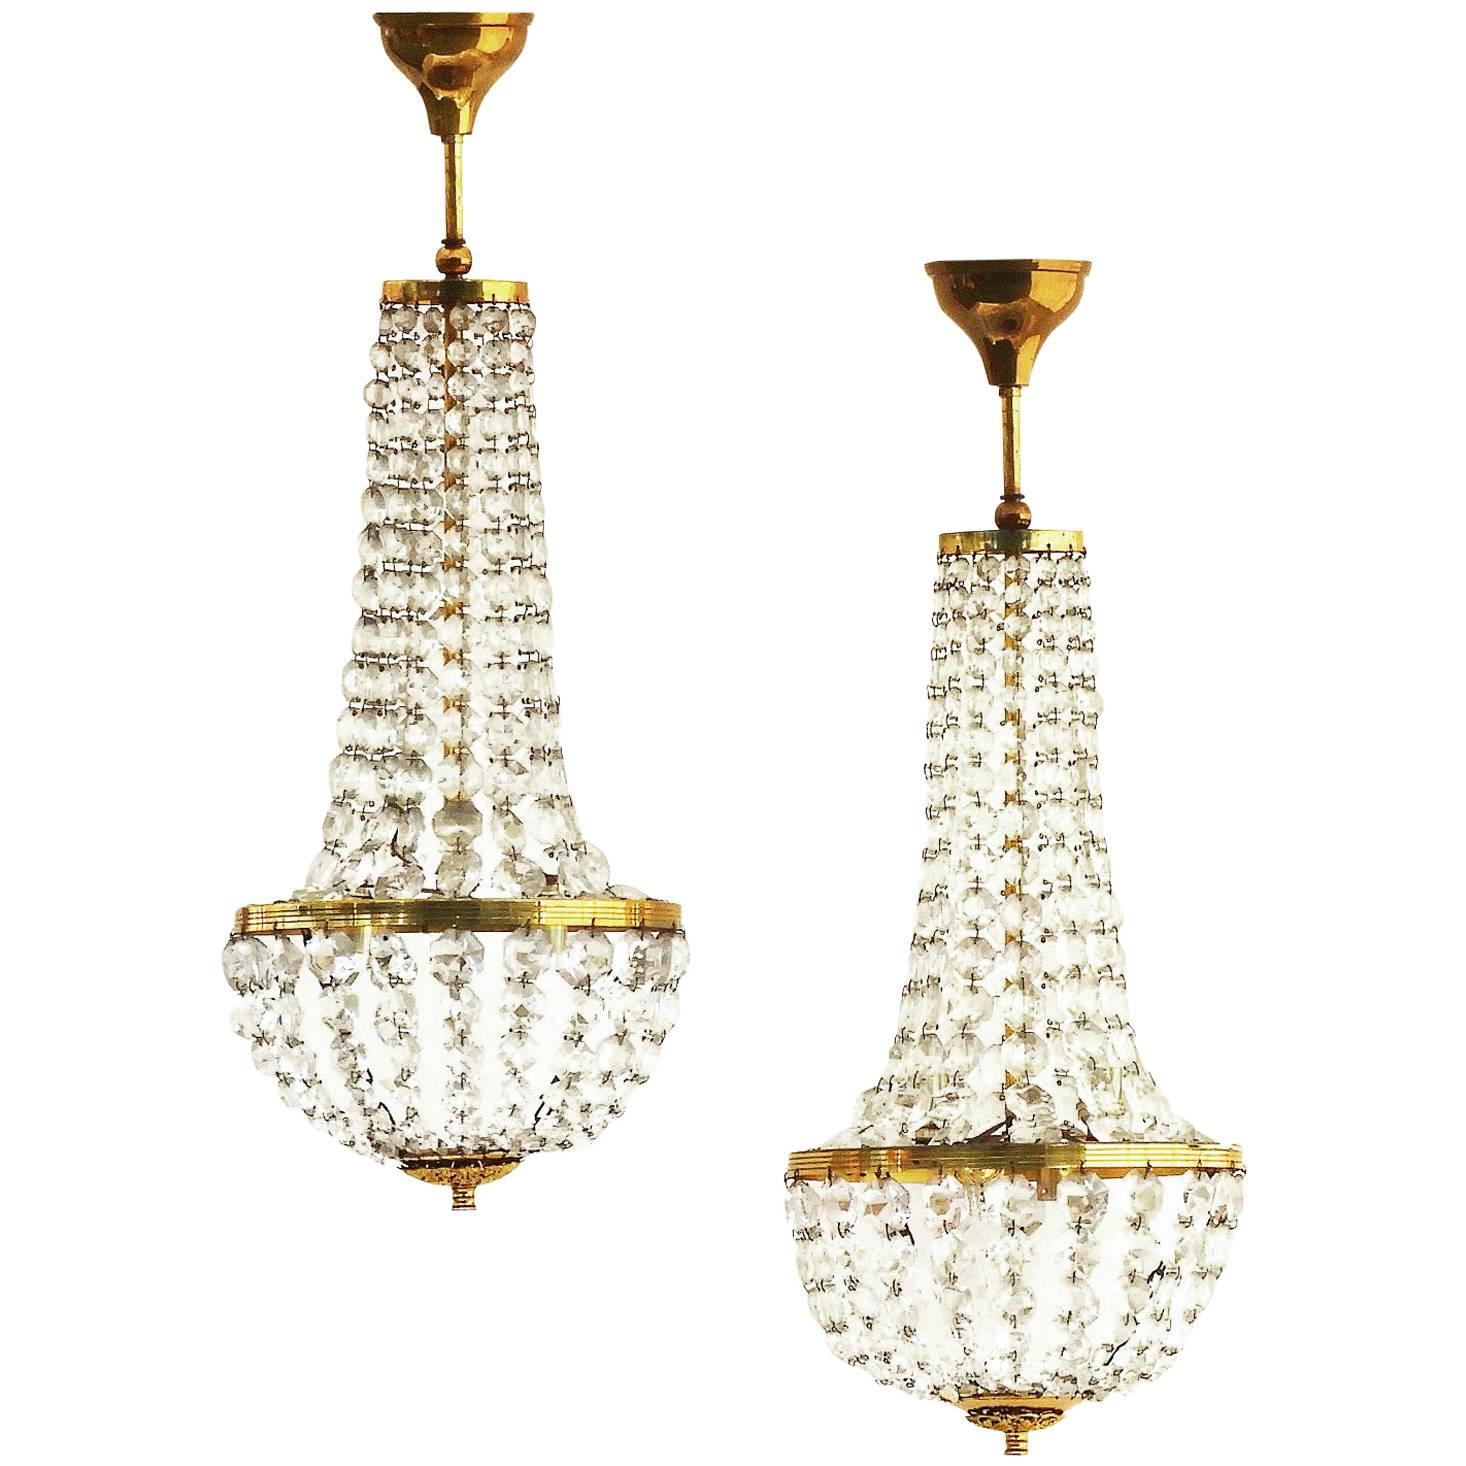 Pair of Belle Epoque Chandeliers French Mongolfiers Balloon Crystal, circa 1900